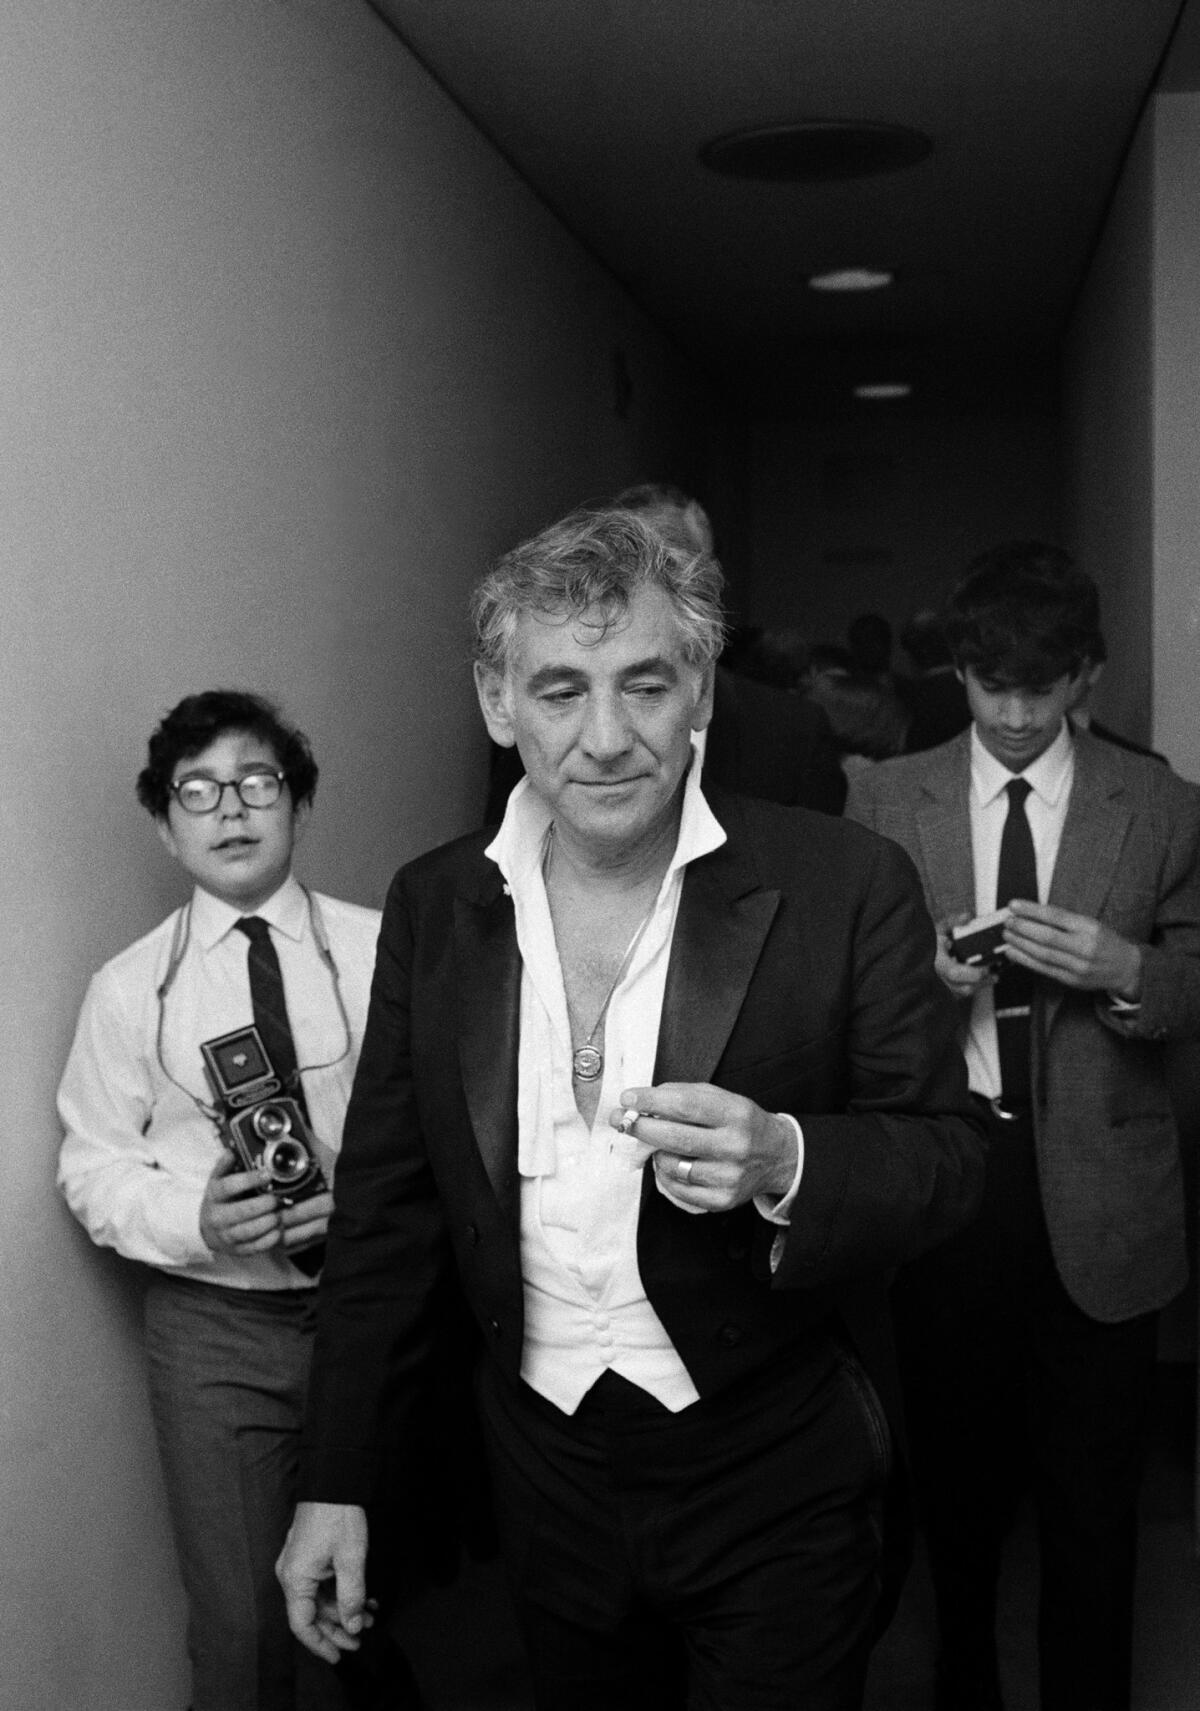 Leonard Bernstein walks to his dressing room following his last performance as music director of the New York Philharmonic in 1969.